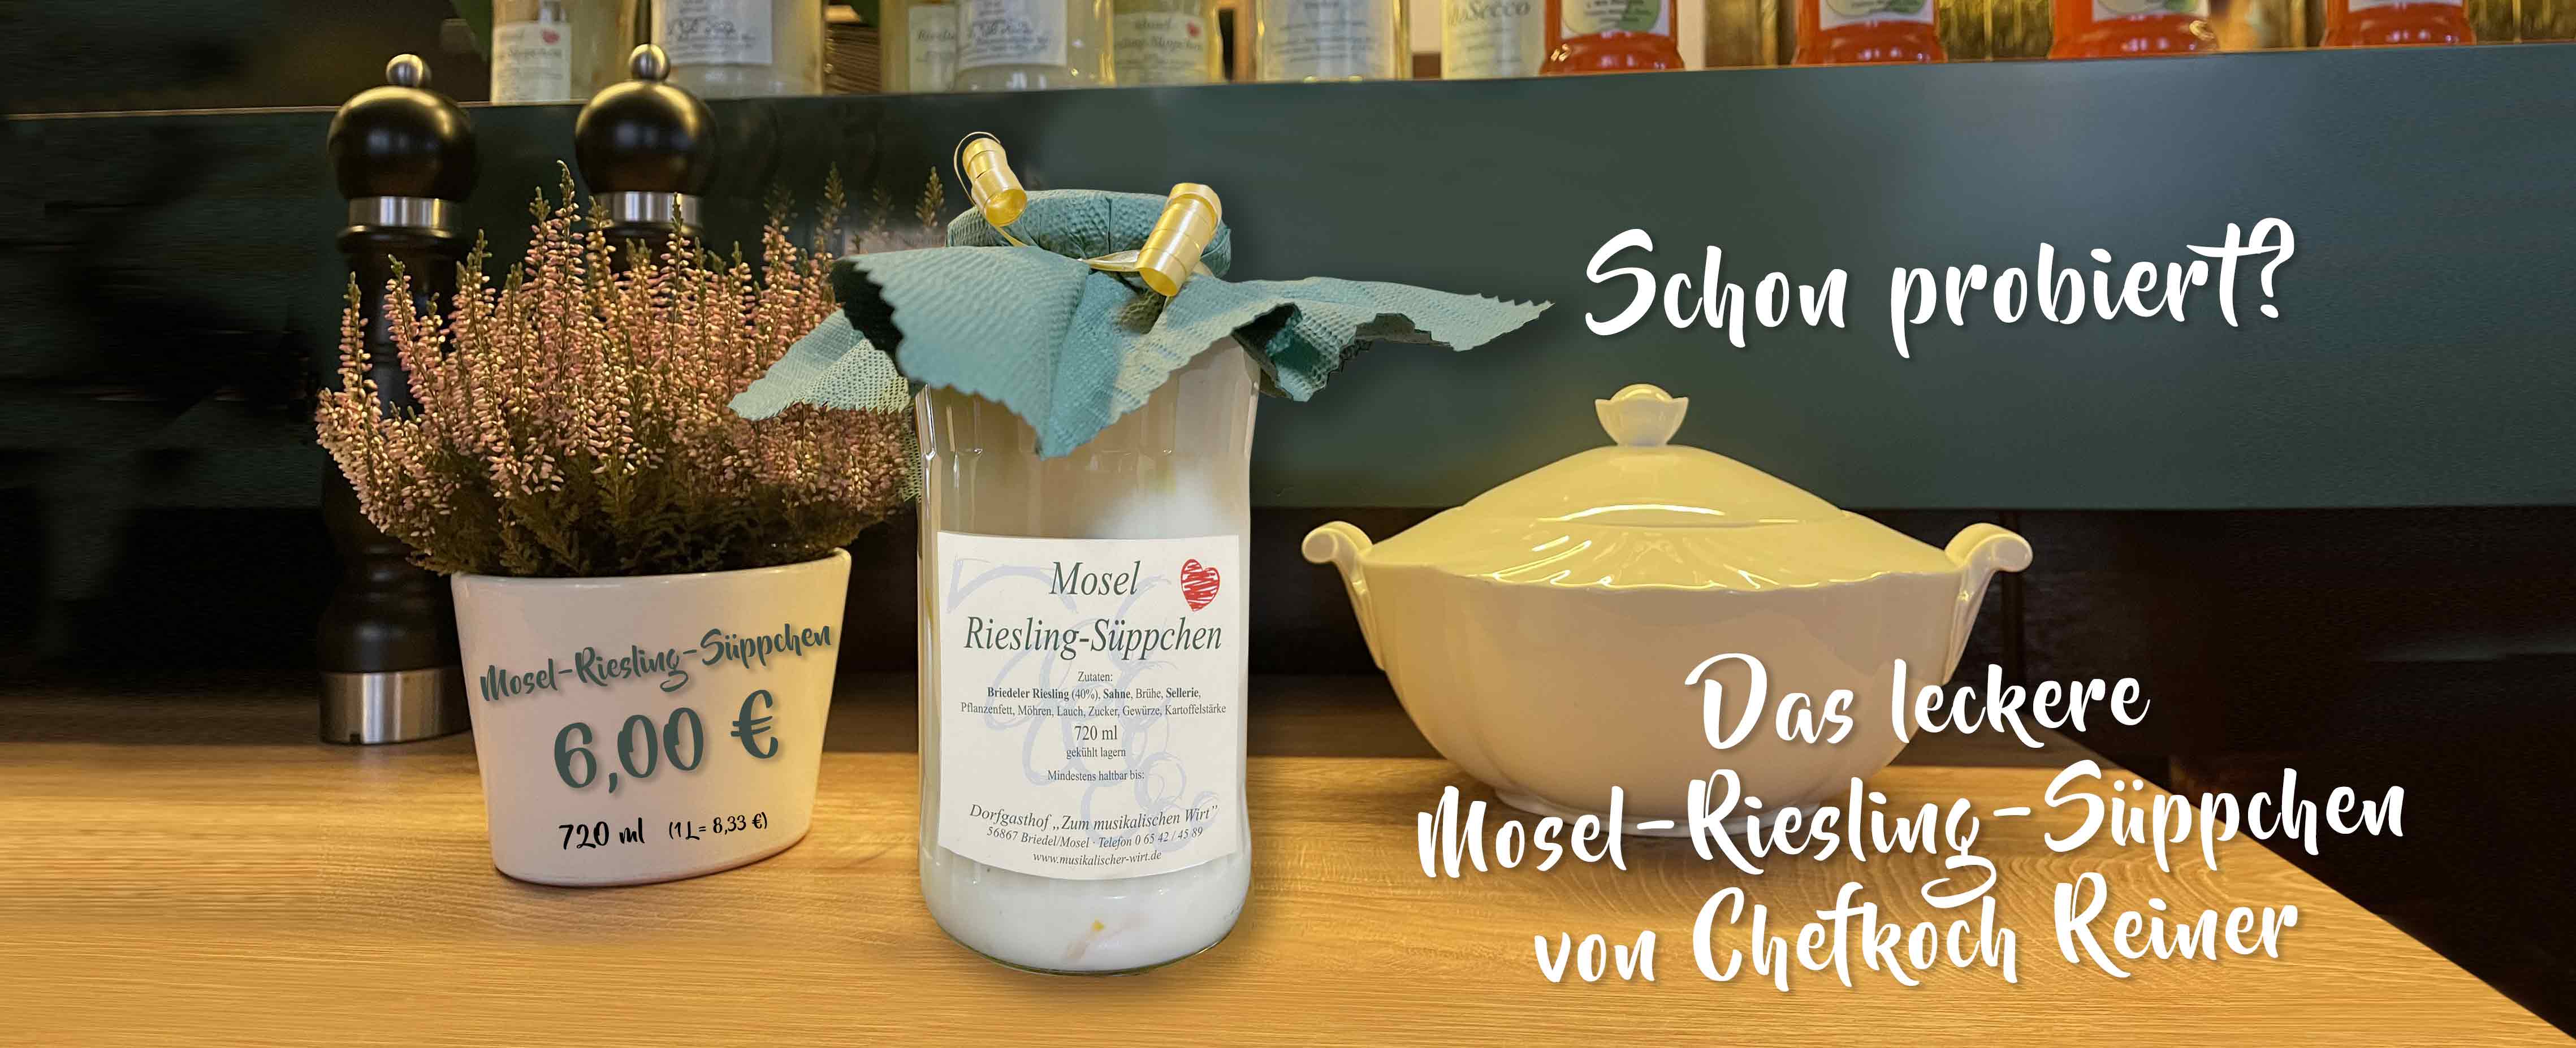 Riesling Sueppchen Modul